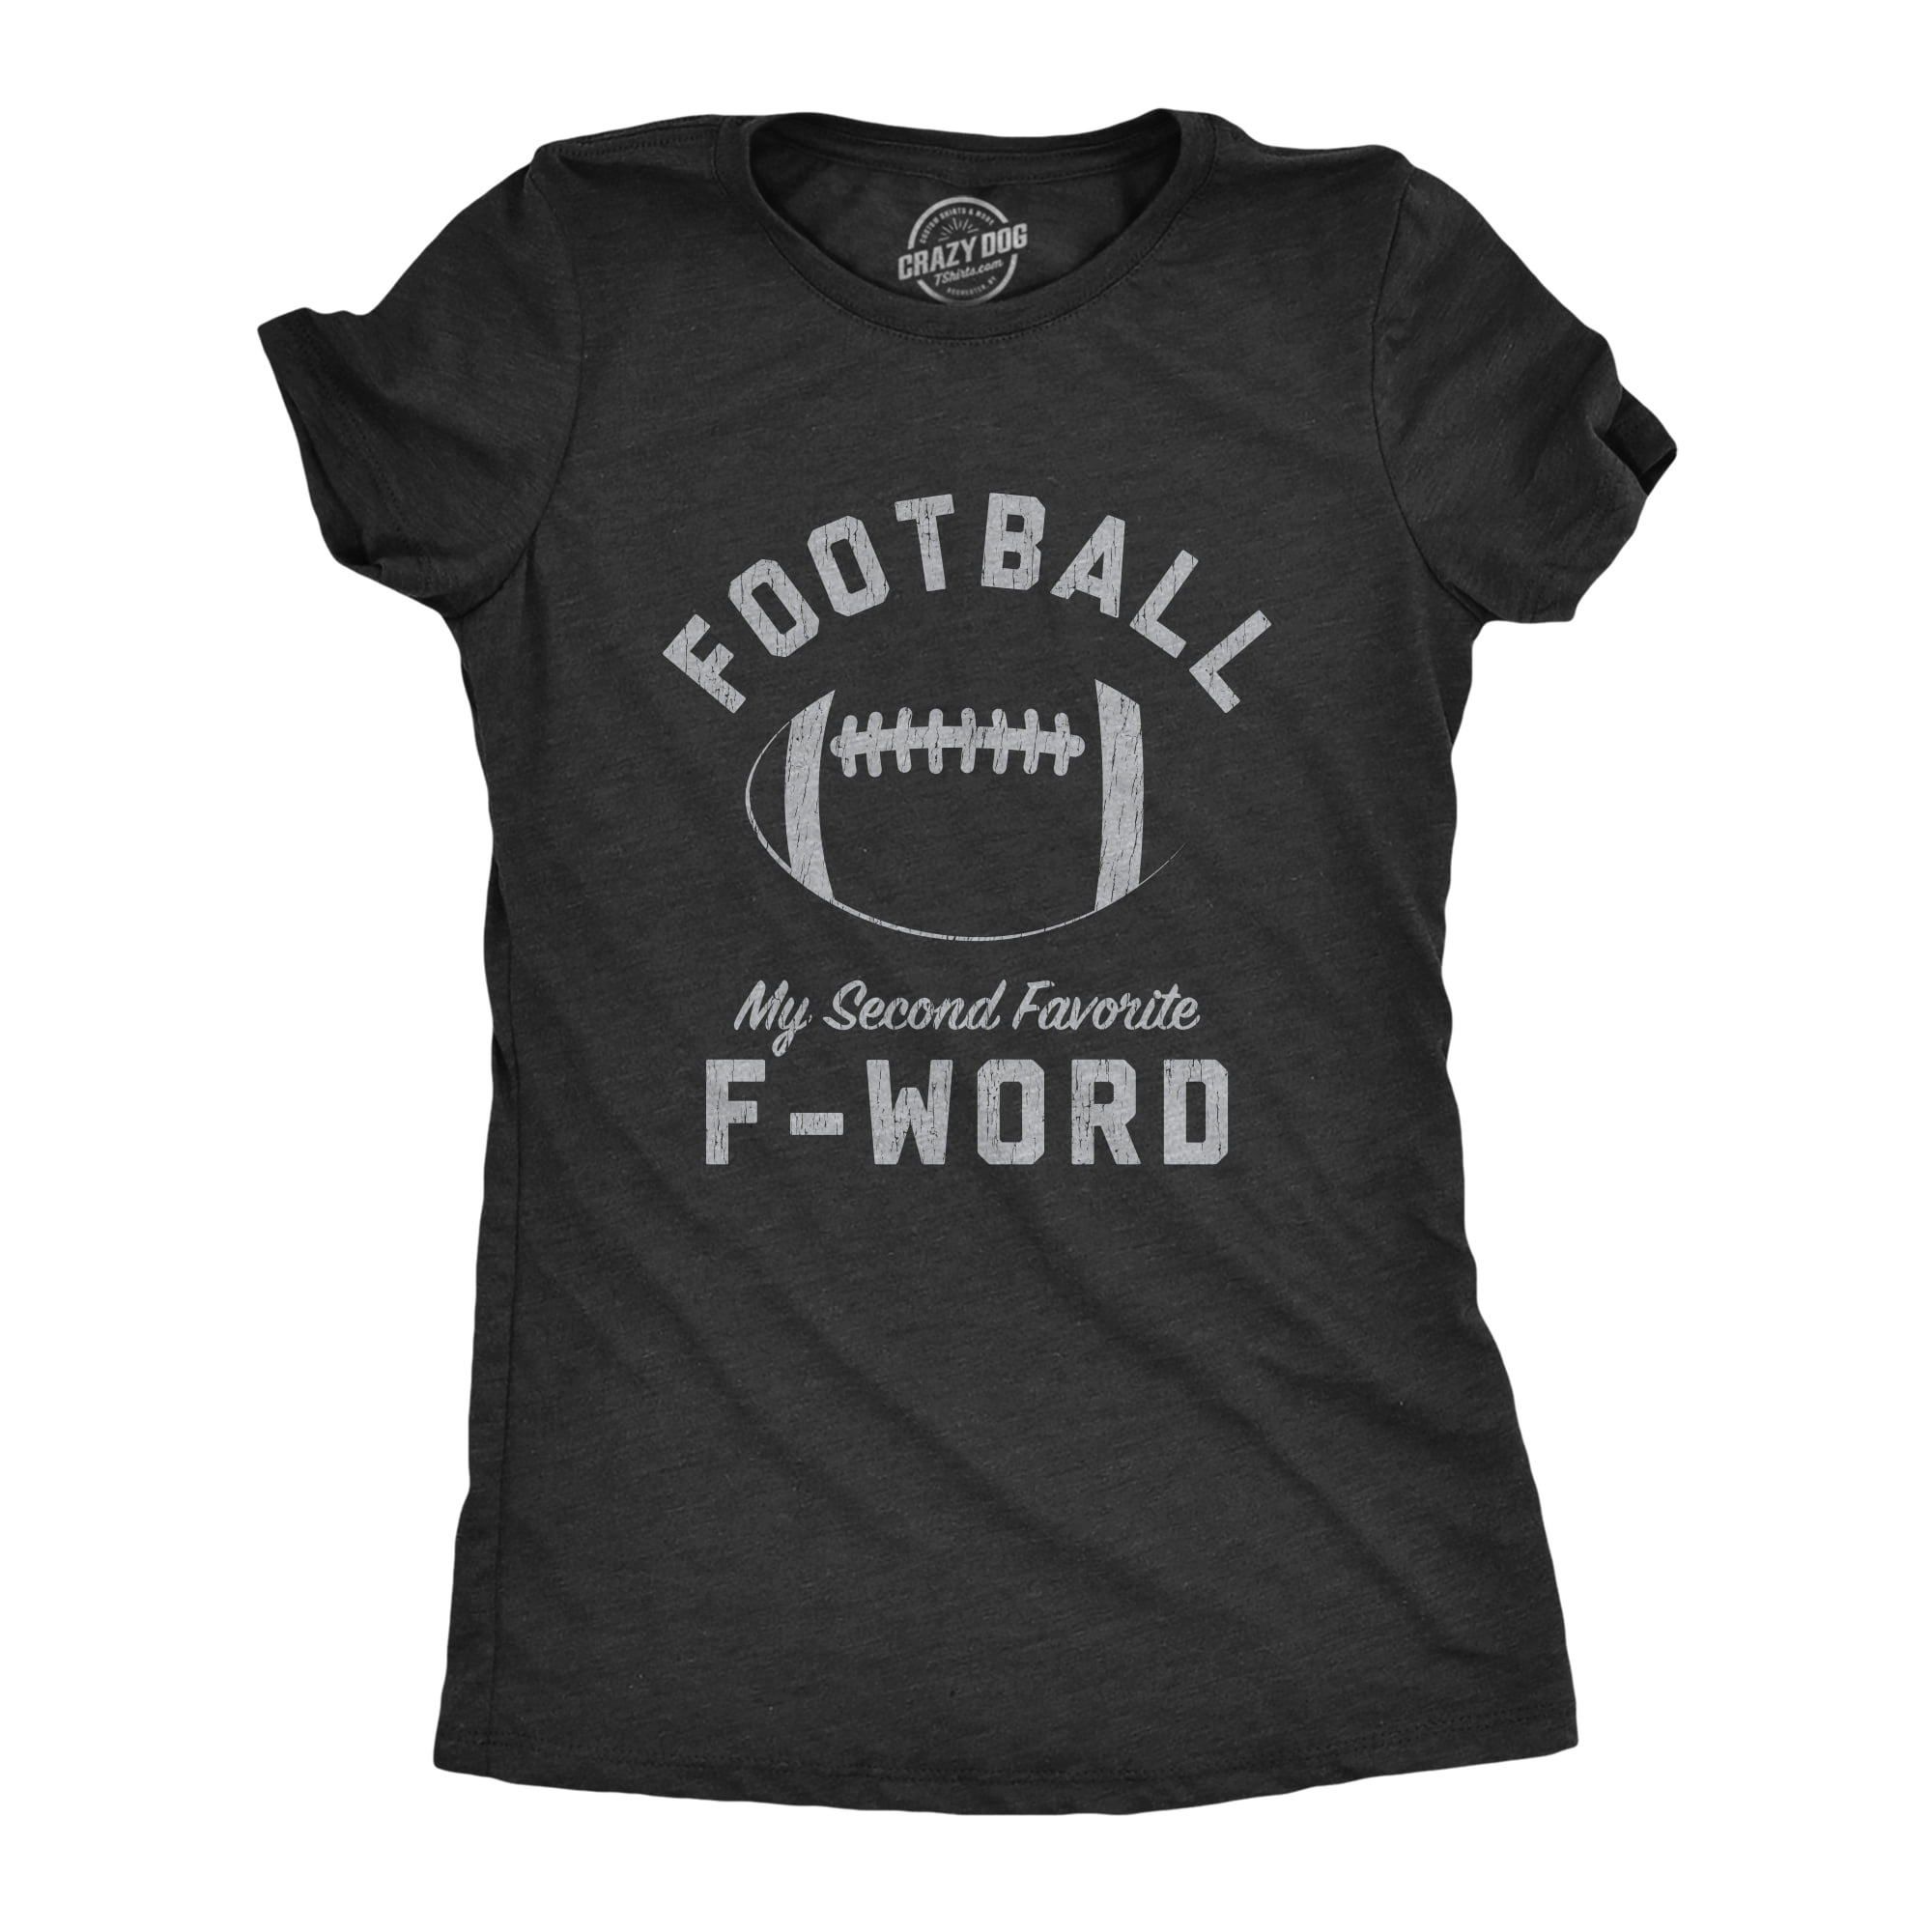 Crazy Dog T-shirts Womens Football My Second Favorite F-Word Tshirt Funny Sunday Sports Novelty Tee